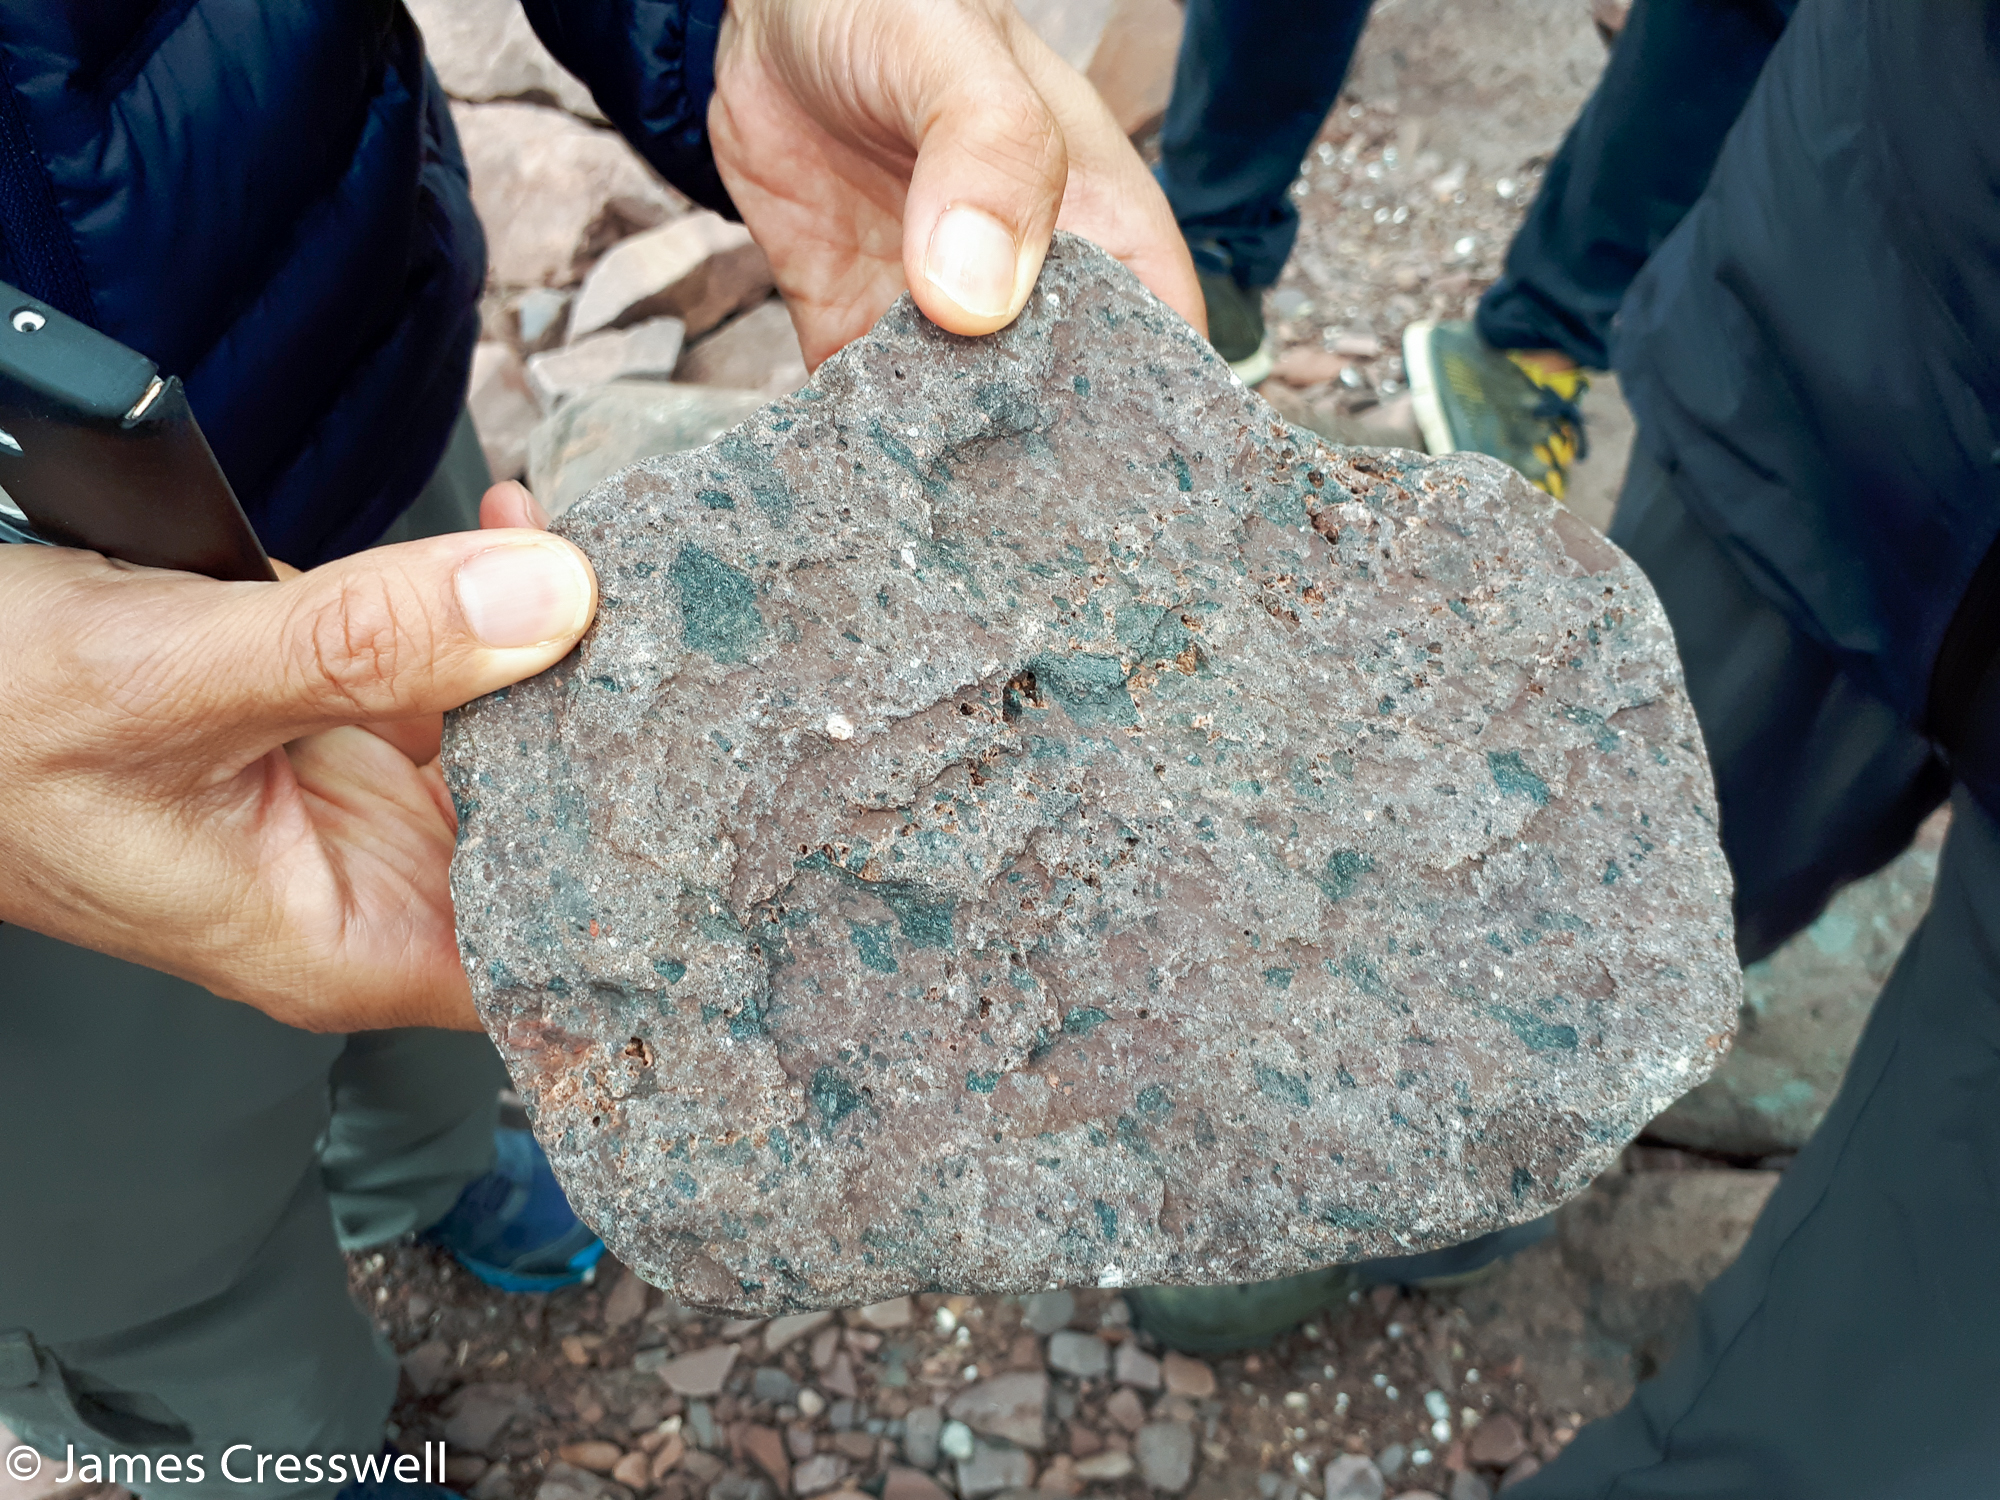 A photograph of a hand holding a reddish rock containing green glassy fragments, a one billion year old tektite at Stoer, taken on a GeoWorld Travel Scotland geology trip, tour and holiday